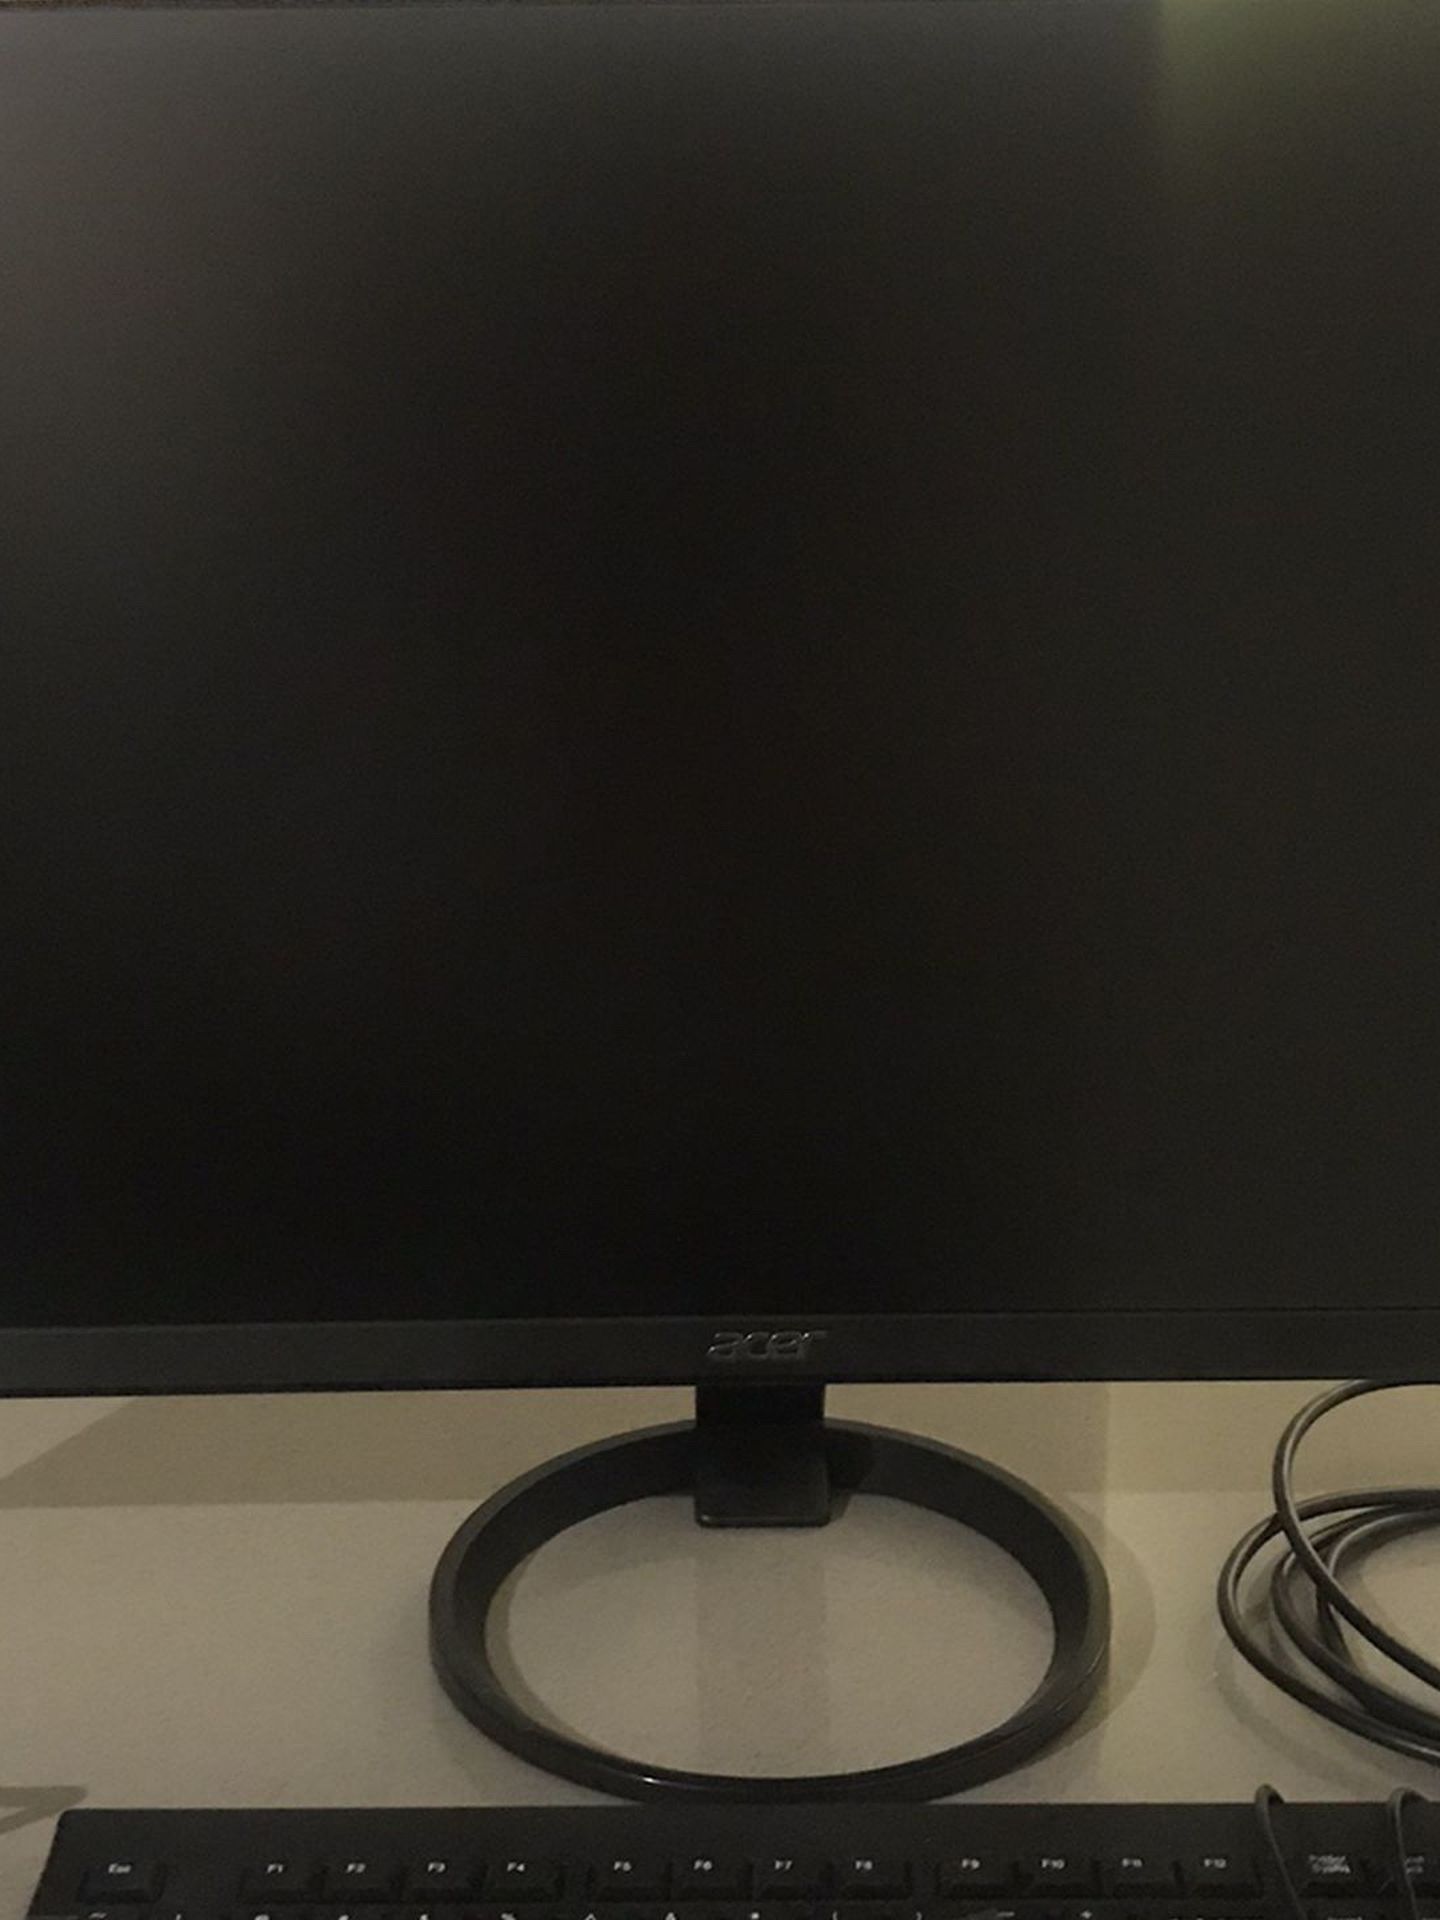 Acer 27” Monitor